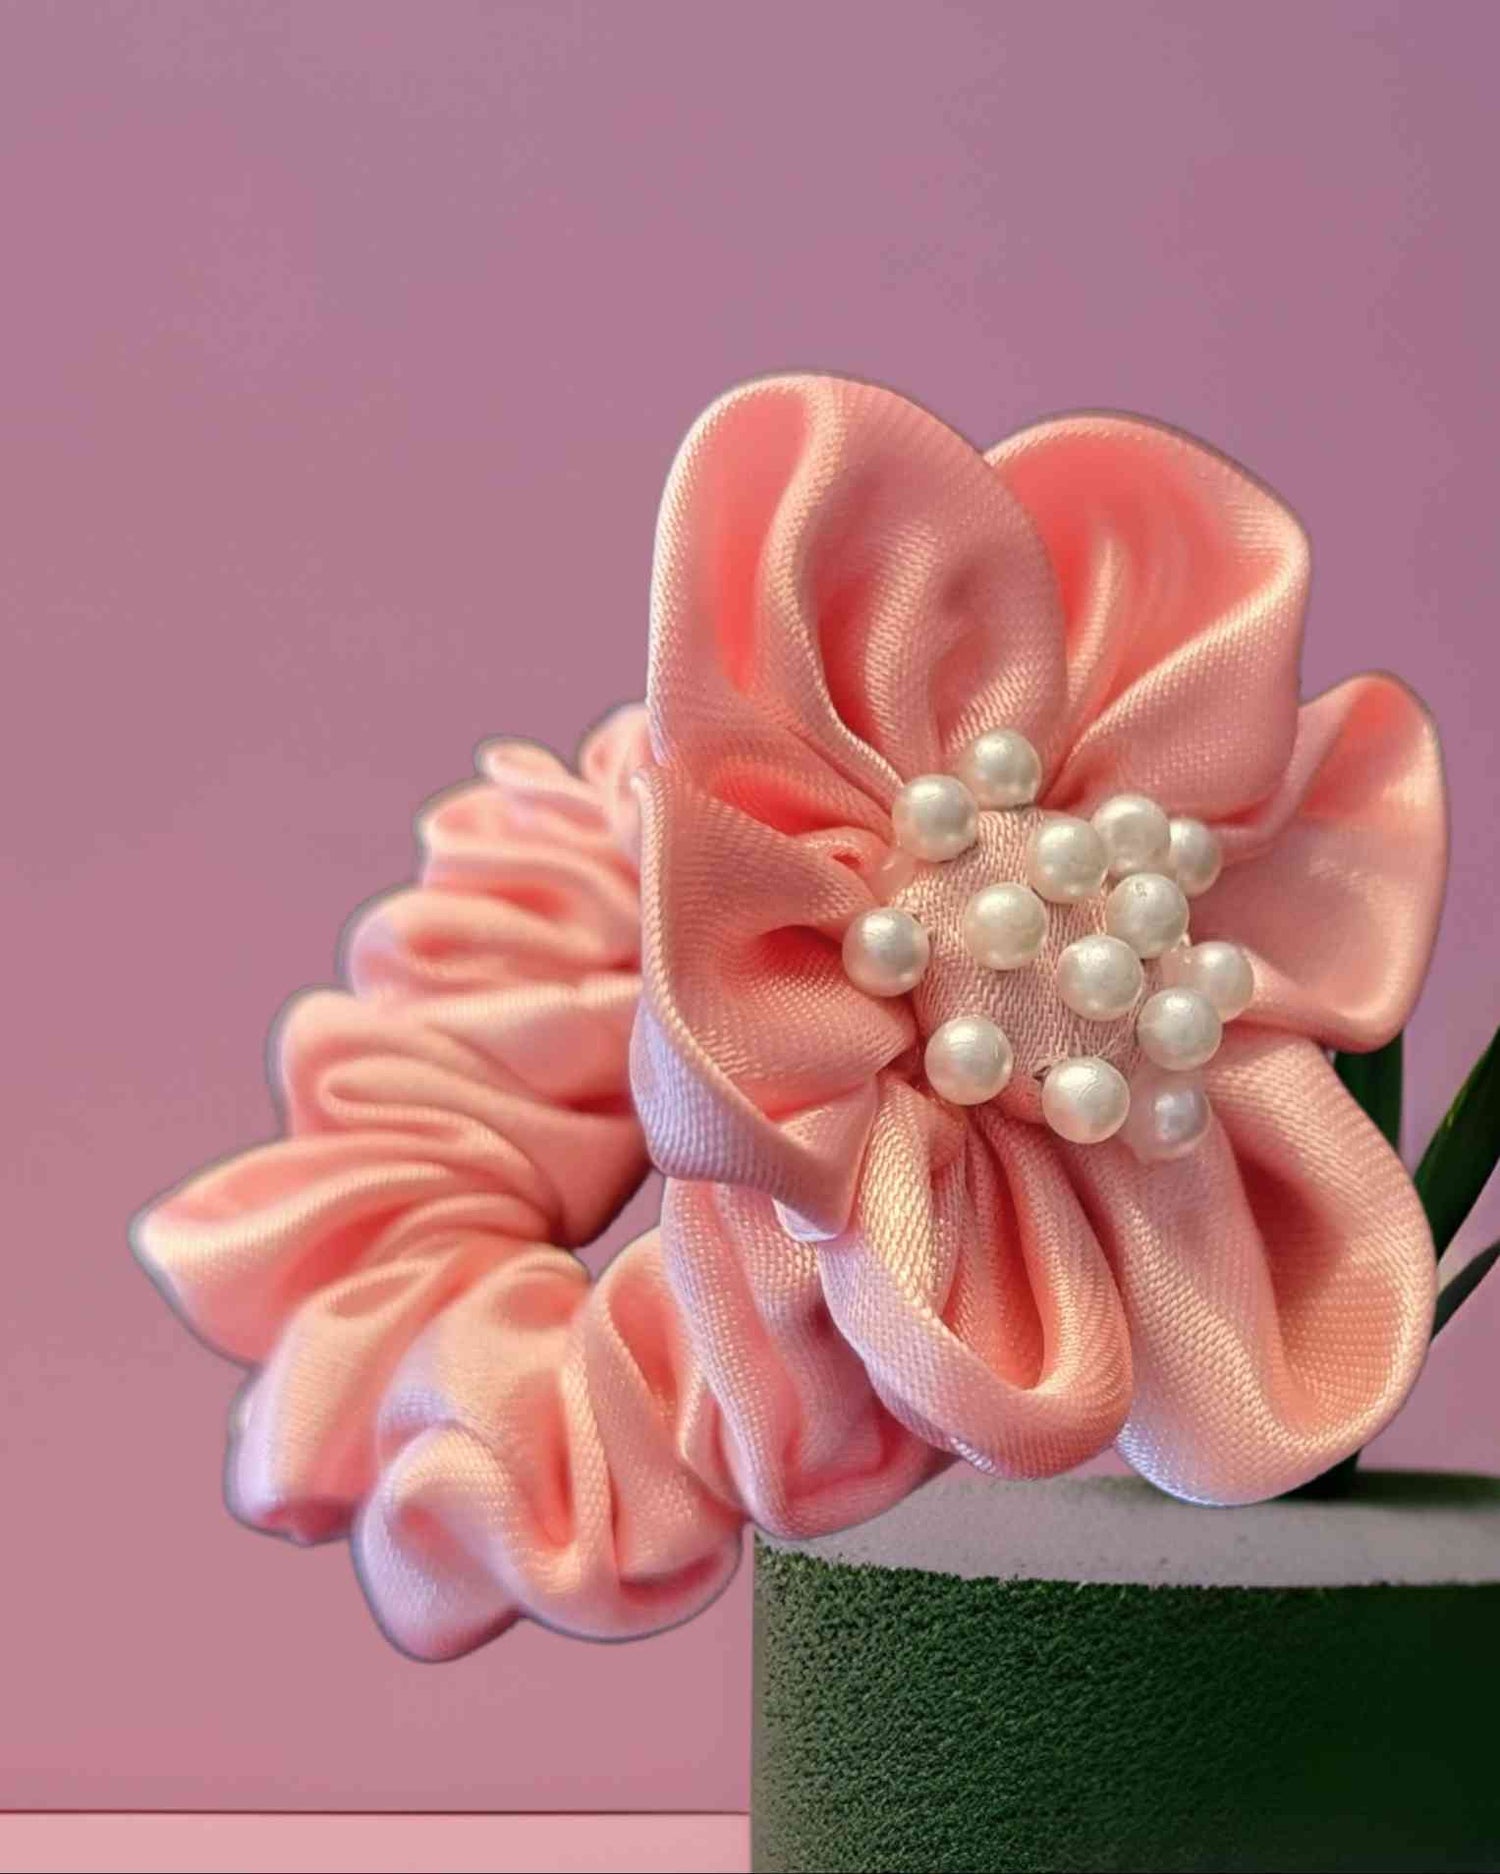 How to Make Flowers Using Satin Ribbon